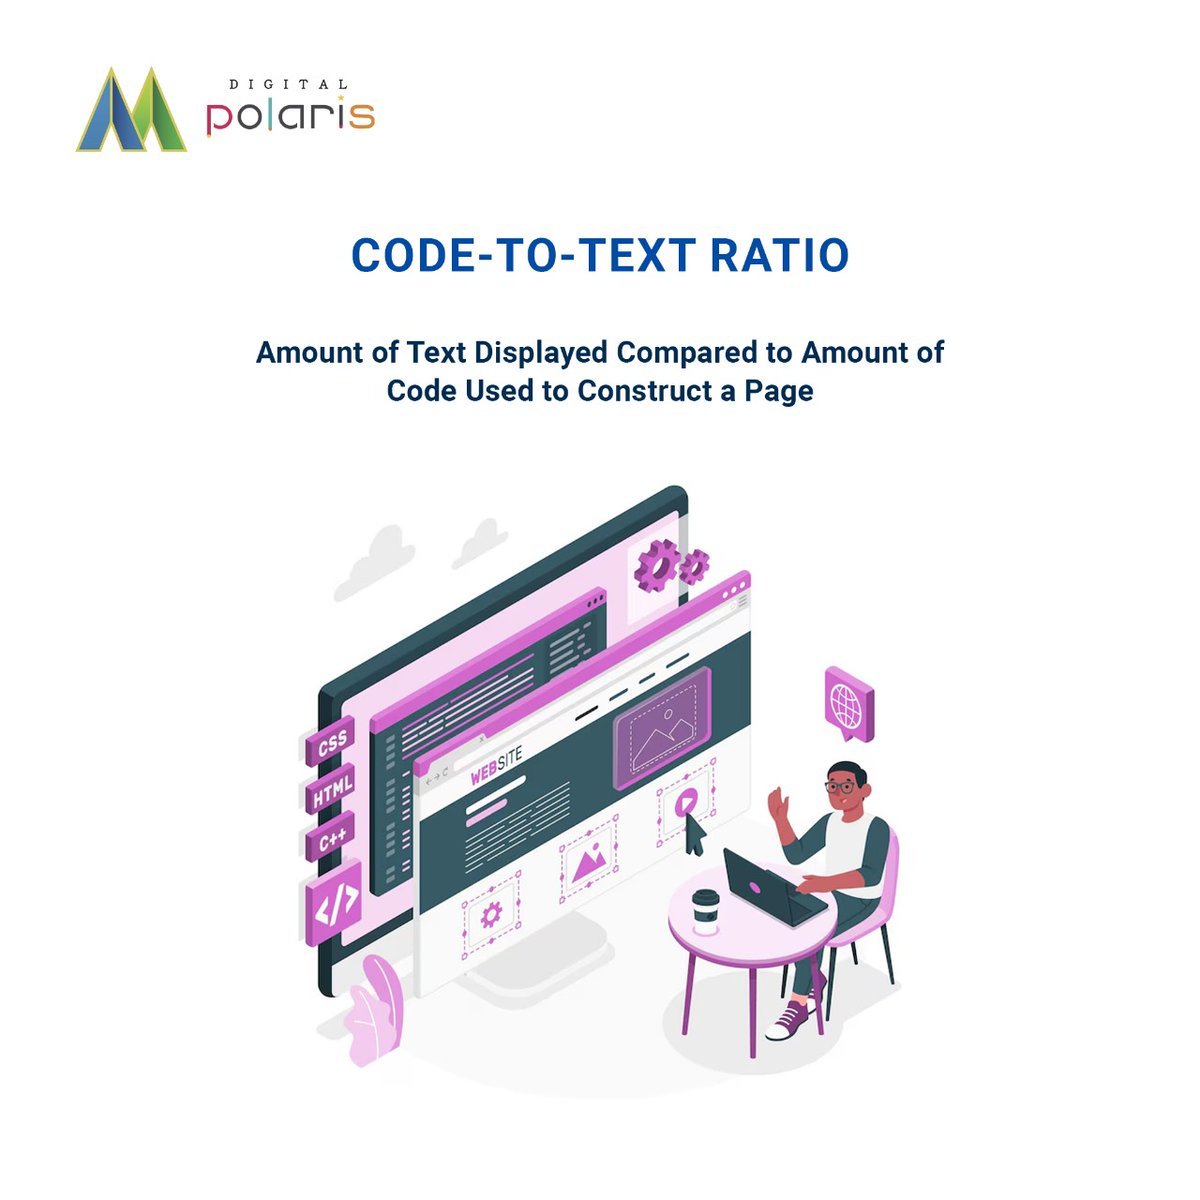 A higher #ratio of #text to #code is considered to provide a better user #experience but is not a direct #ranking factor.

#DigitalPolaris #googlesearch #google #seo #digitalmarketing #googlepixel #searchengineoptimization #googleads #marketing #googleadwords #searchengine